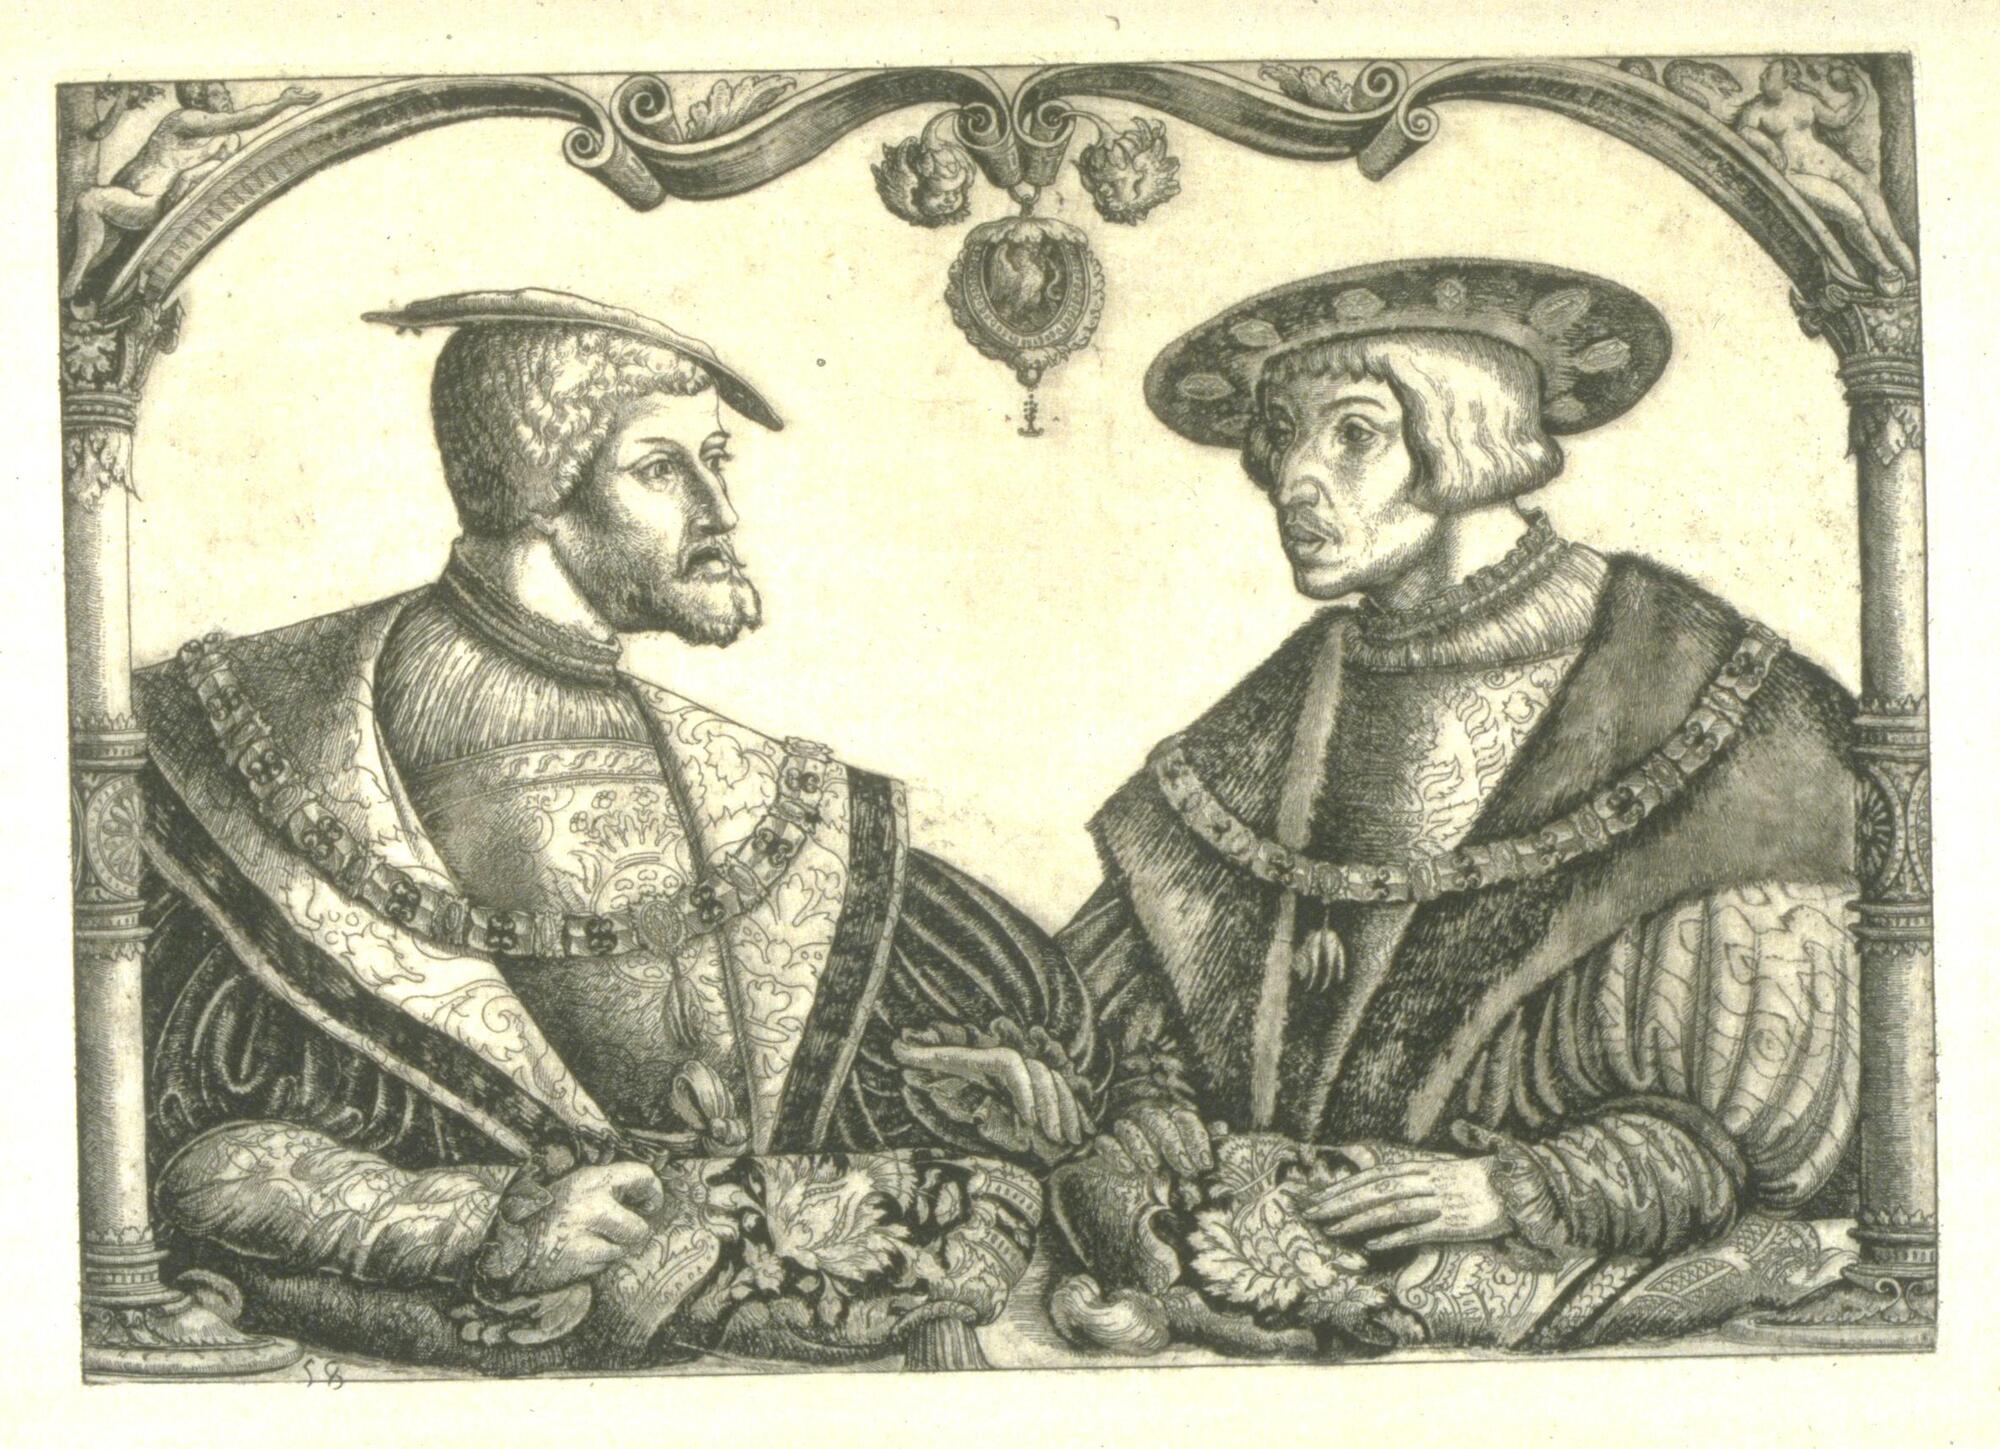 Two male figures wearing voluminous patterned garmets and flat brimmed hats face one another, surrounded by an ornamental, classically inspired frame. Larson 2/7/18<br />
&nbsp;